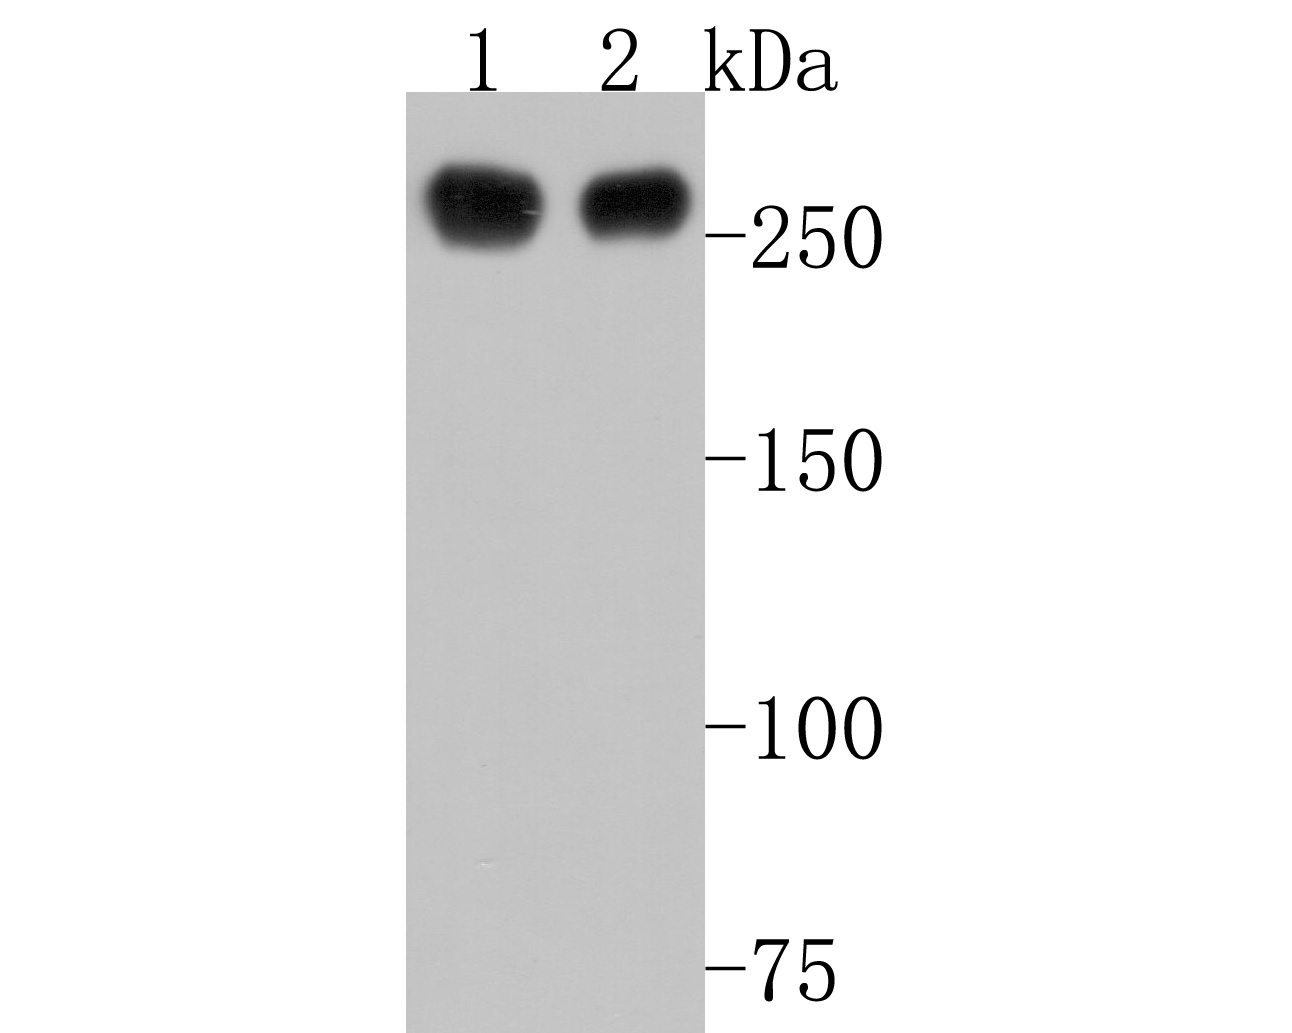 Western blot analysis of Phospho-POLR2A (S2) on different lysates. Proteins were transferred to a PVDF membrane and blocked with 5% BSA in PBS for 1 hour at room temperature. The primary antibody (ET1703-86, 1/500) was used in 5% BSA at room temperature for 2 hours. Goat Anti-Rabbit IgG - HRP Secondary Antibody (HA1001) at 1:200,000 dilution was used for 1 hour at room temperature.<br />
Positive control: <br />
Lane 1: Hela cell lysate<br />
Lane 2: MCF-7 cell lysate